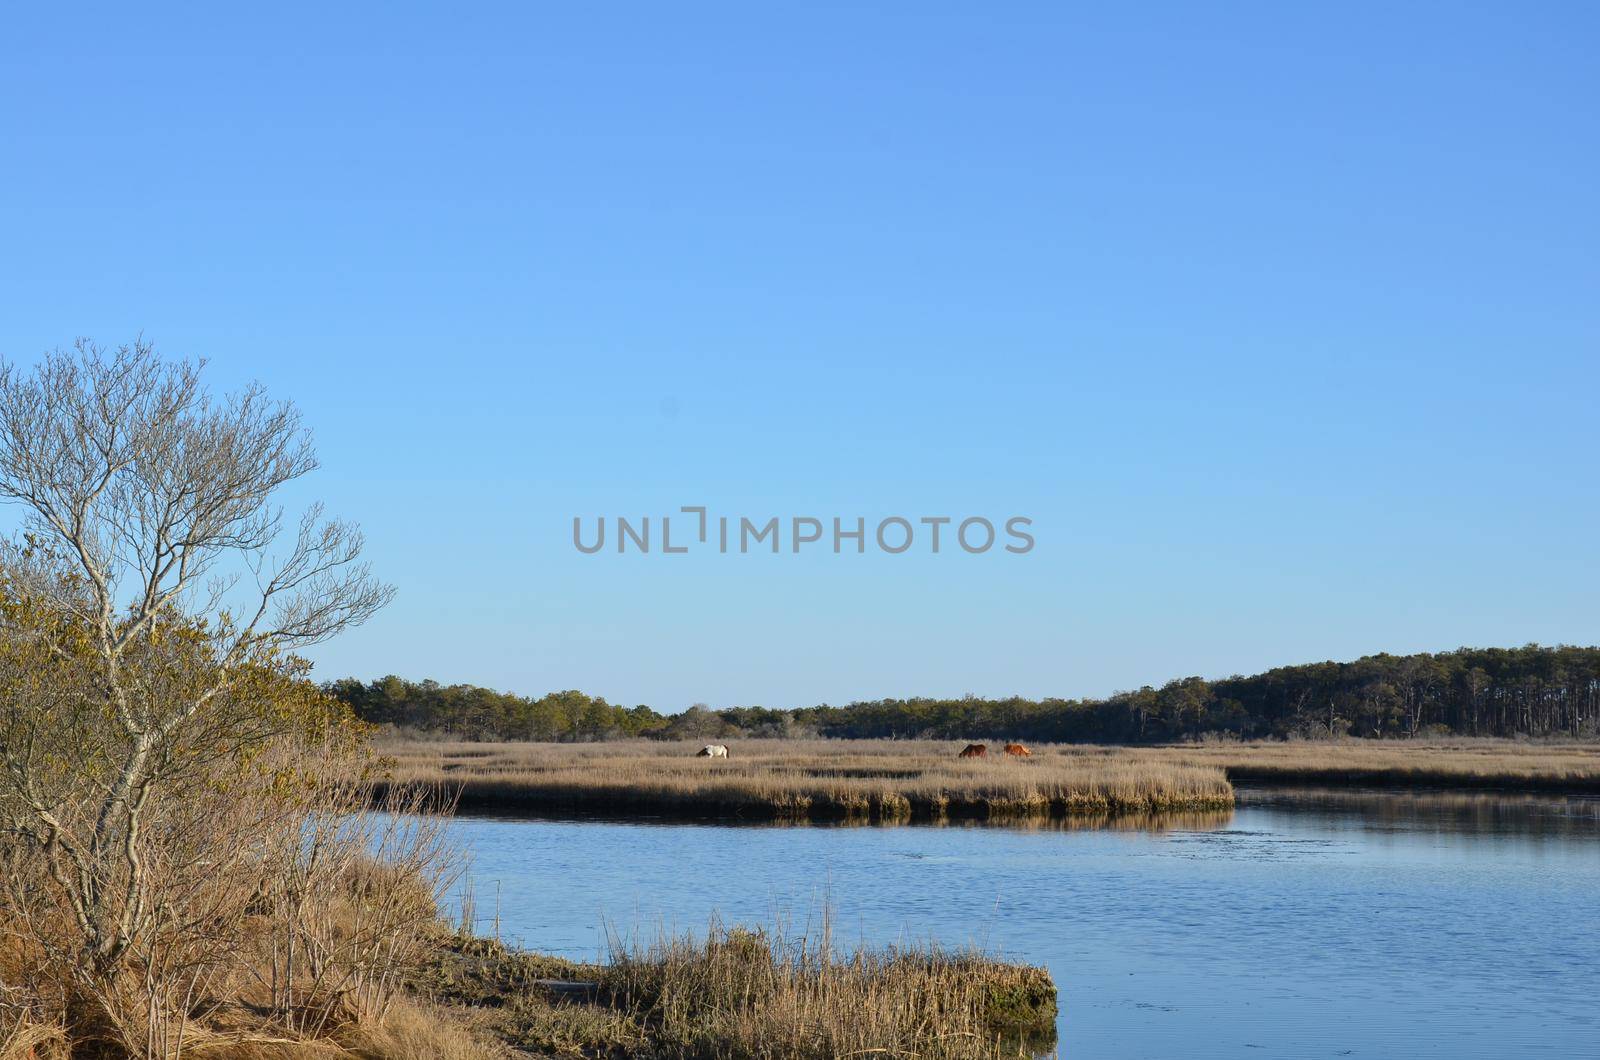 a lake or river with brown grasses and shore by stockphotofan1